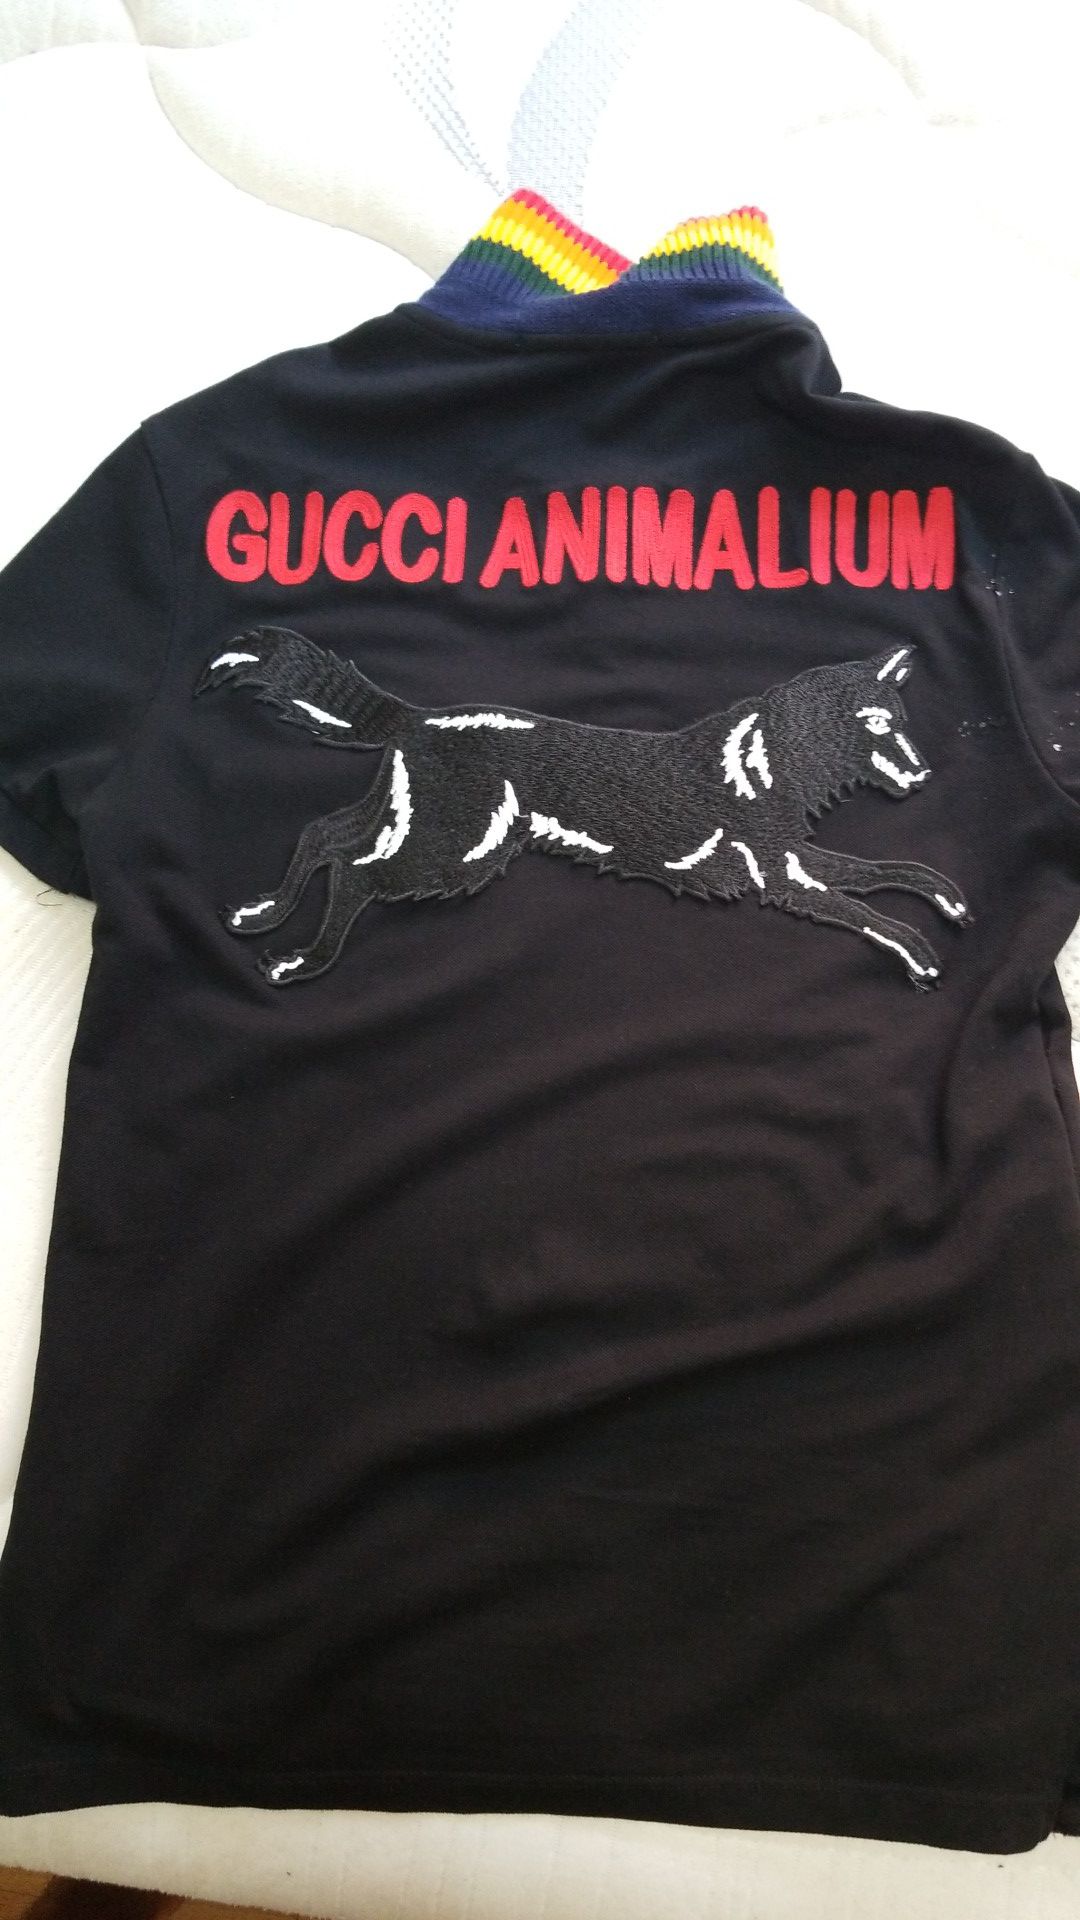 GUCCI ANIMALIUM XS for Sale in Queens, NY - OfferUp